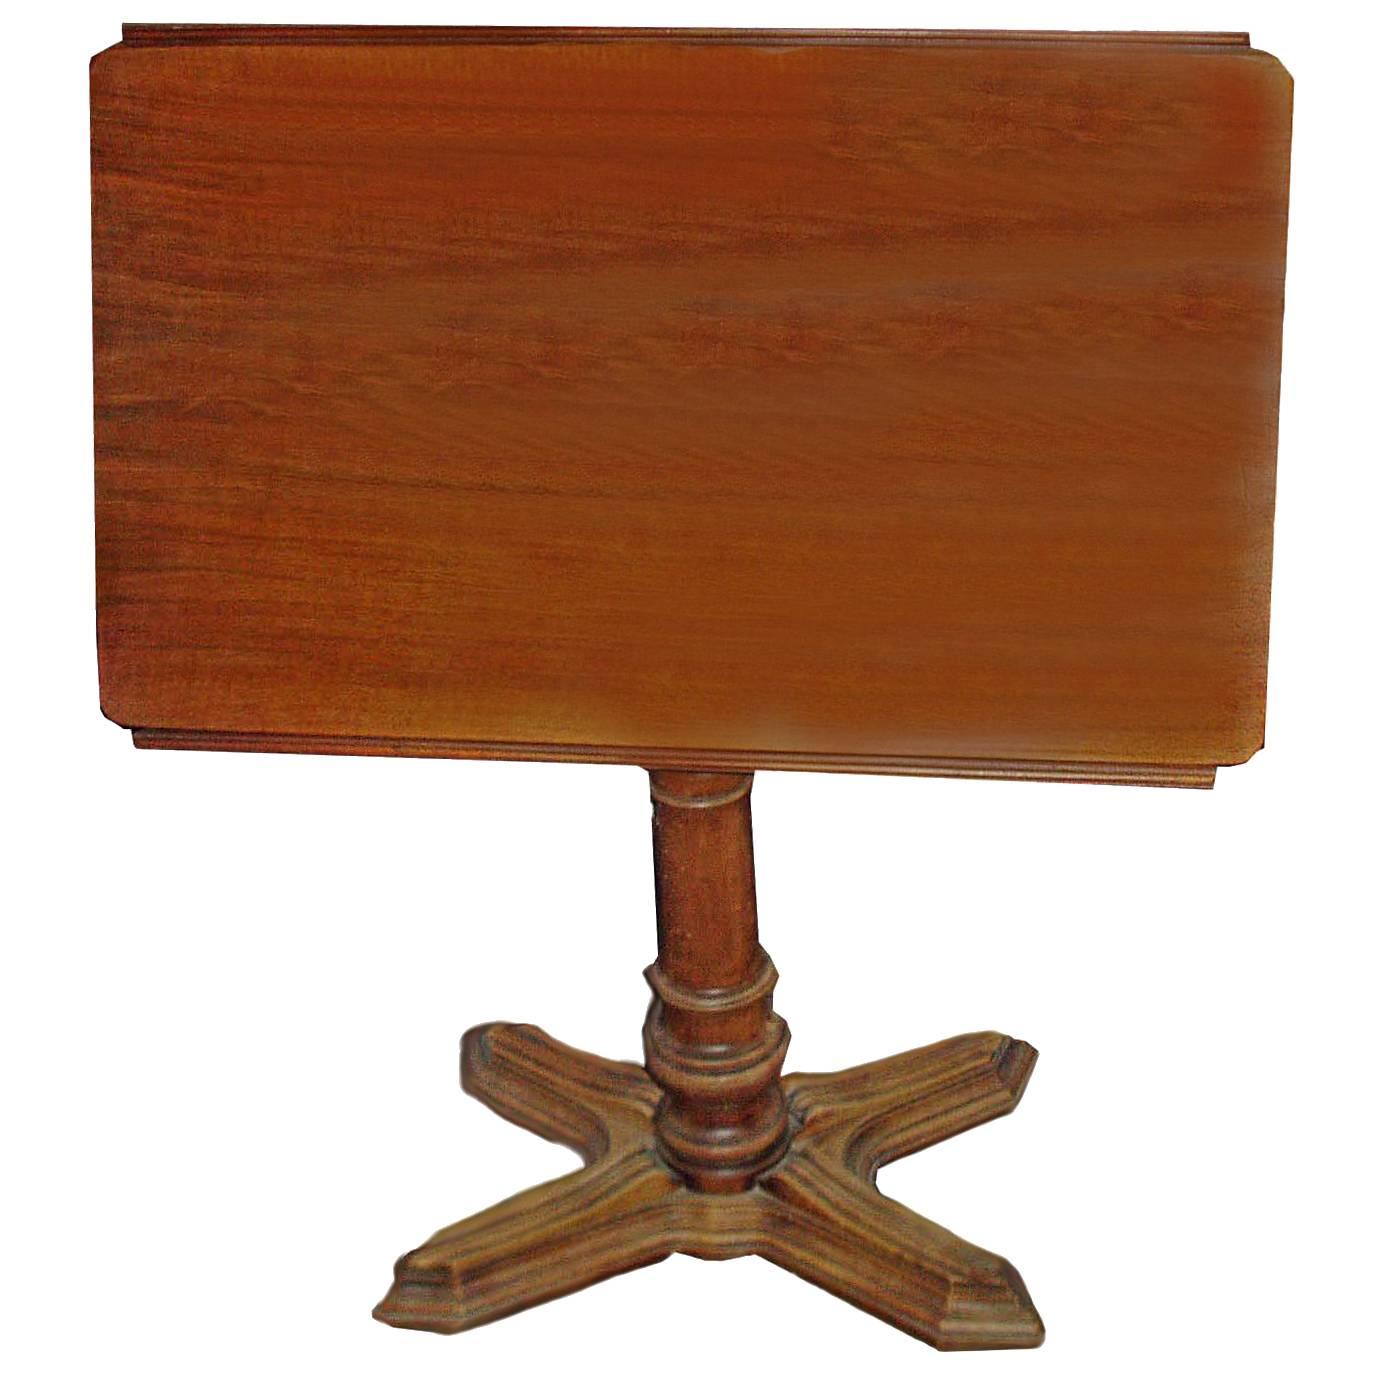 French Walnut 3-in-1 Adjustable Table/Easel/Bed Stand, "Soleil", circa 1870